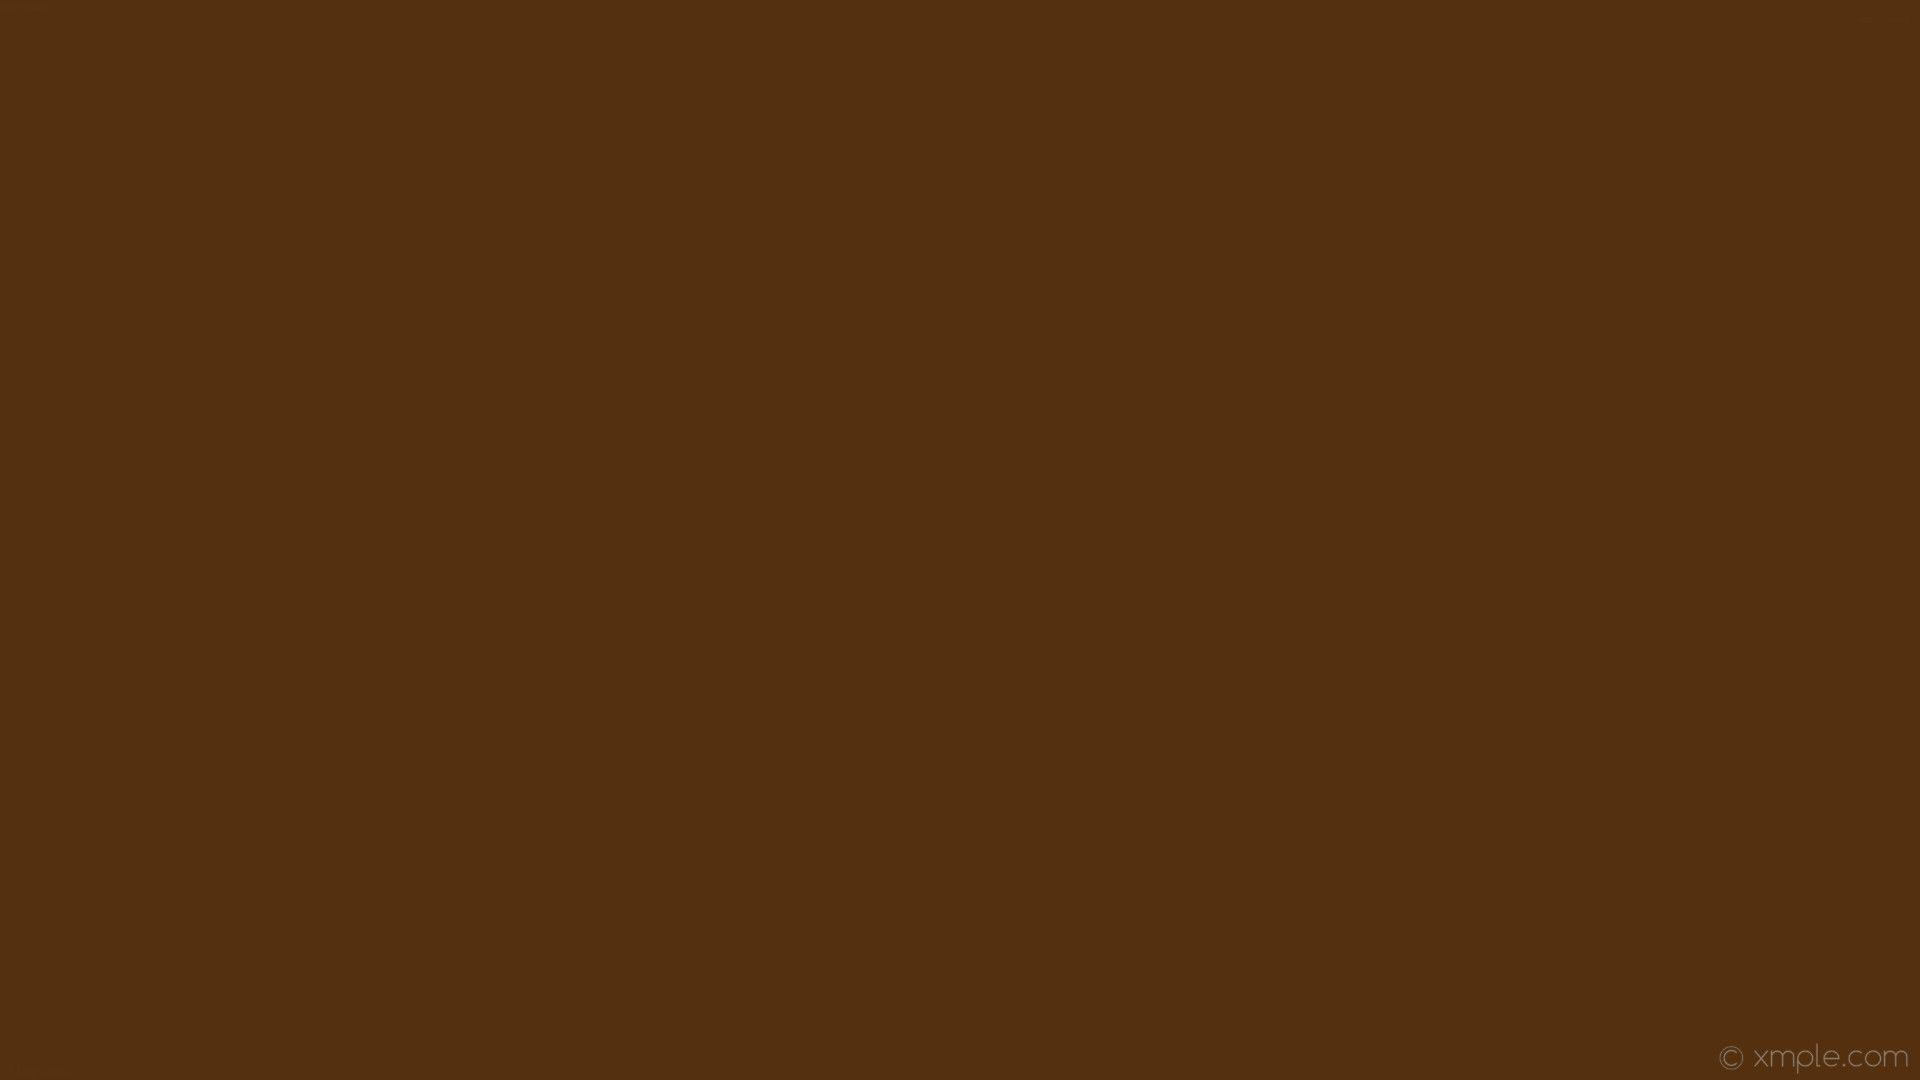 Plain Brown Wallpapers - Top Free Plain Brown Backgrounds - Wallpaperaccess